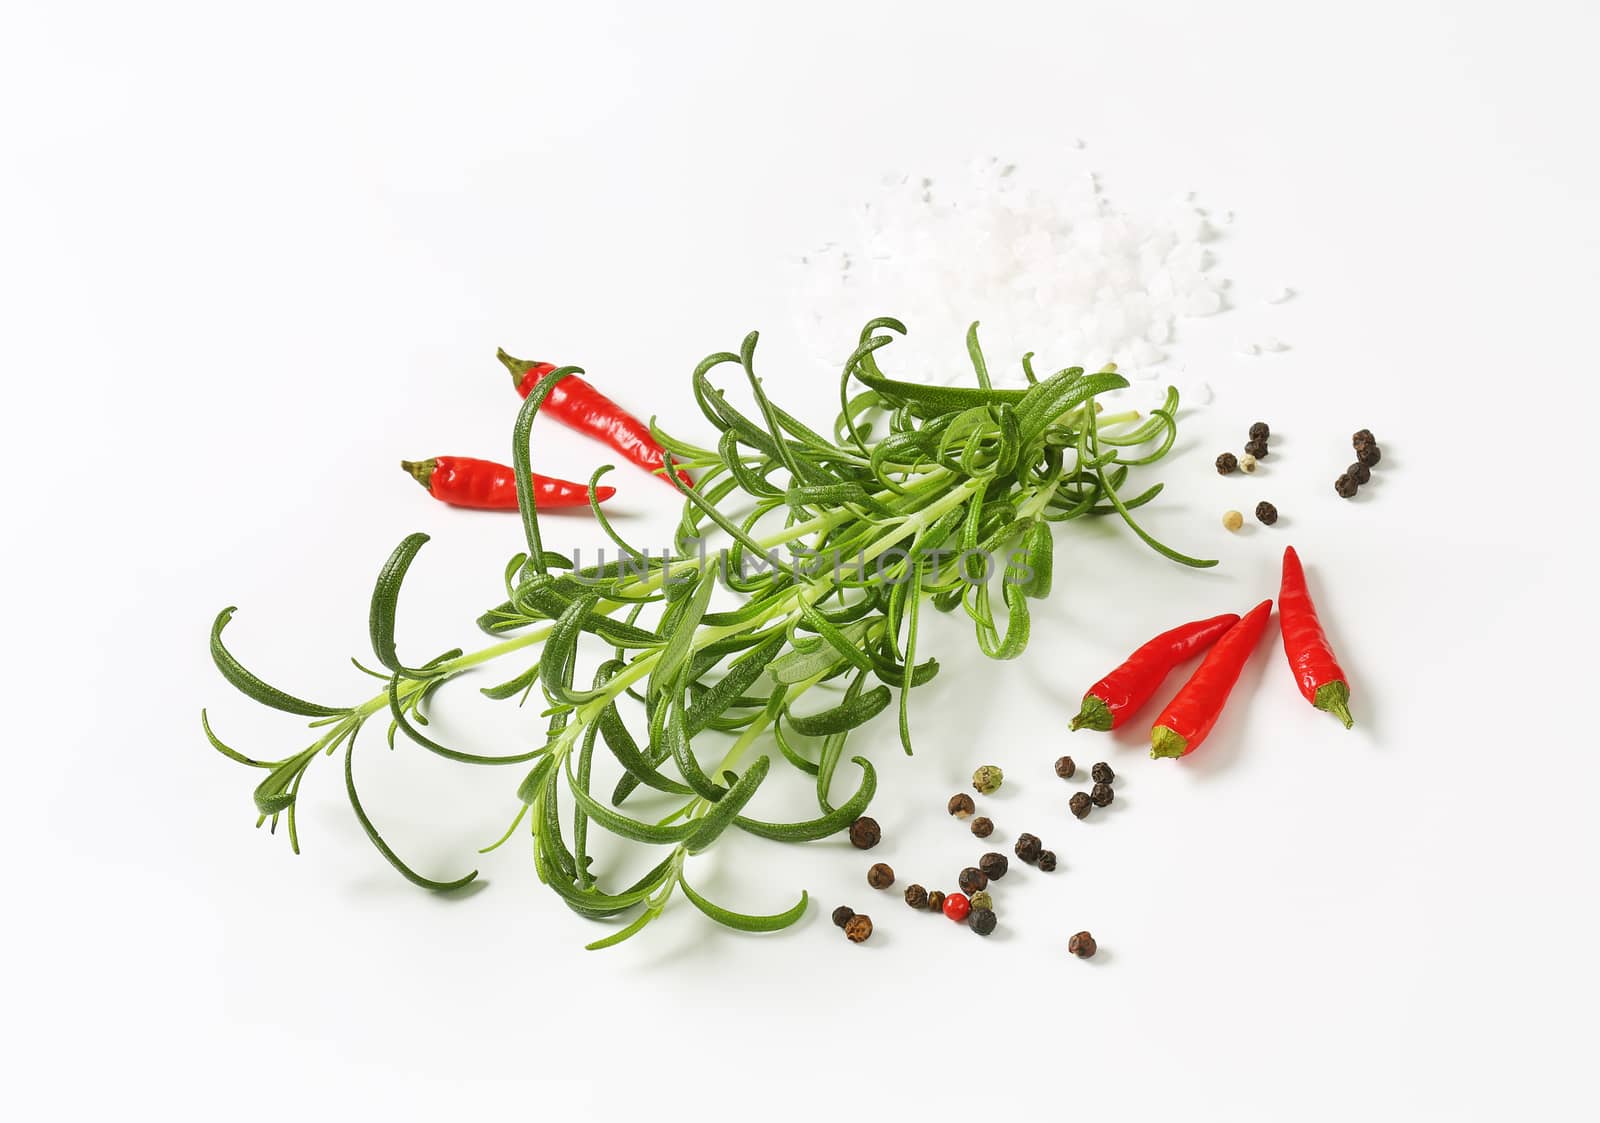 Rosemary, peppercorns and red chili peppers by Digifoodstock